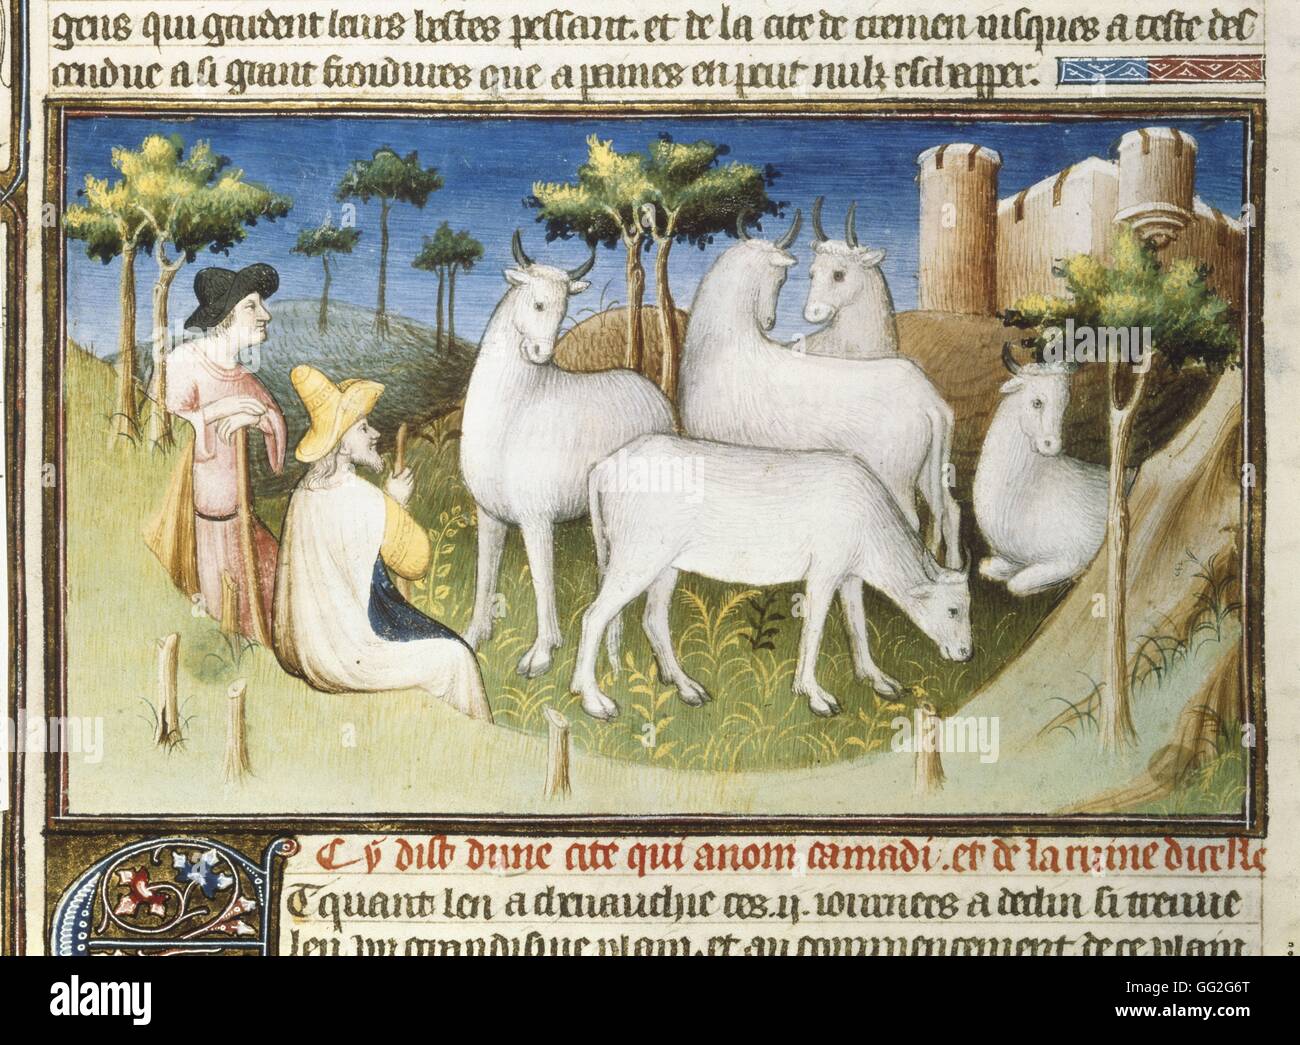 Mazarine Master French school The Travels of Marco Polo: the Bulls from Persia 1410-1412 Miniature from the 'Livre des merveilles du monde' Painting on parchment Paris, Bibliothèque Nationale de France Stock Photo